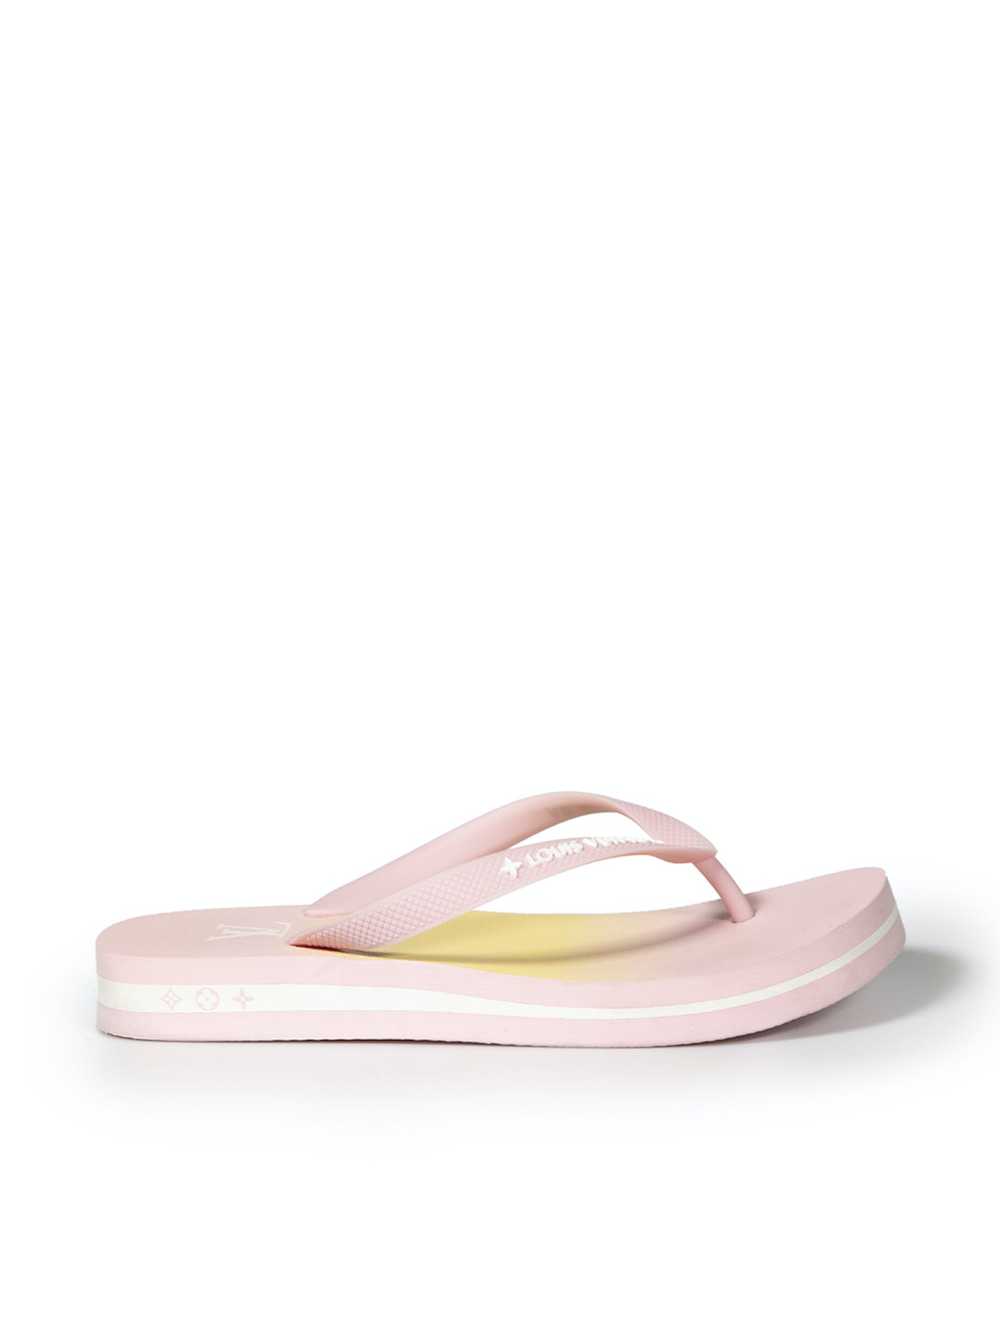 Louis Vuitton Pink “By The Pool” Logo Slippers - image 1